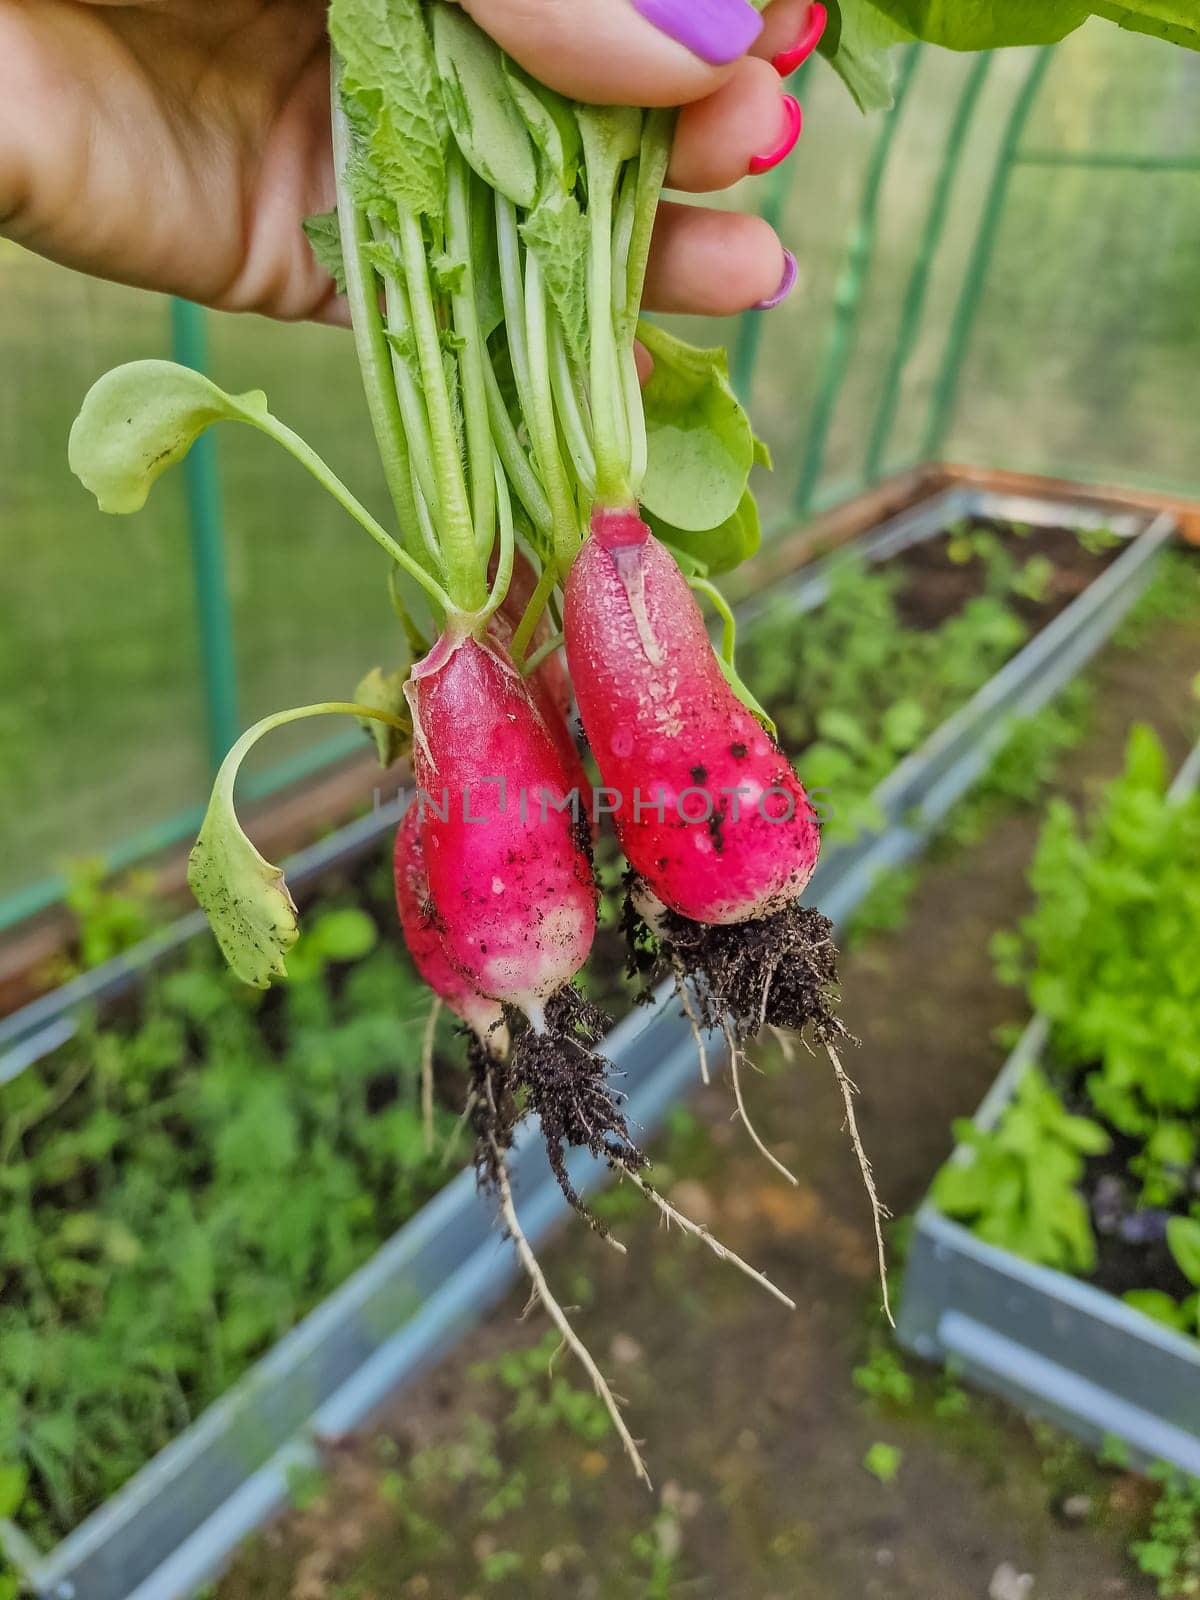 tasty eco radish from own garden. permaculture